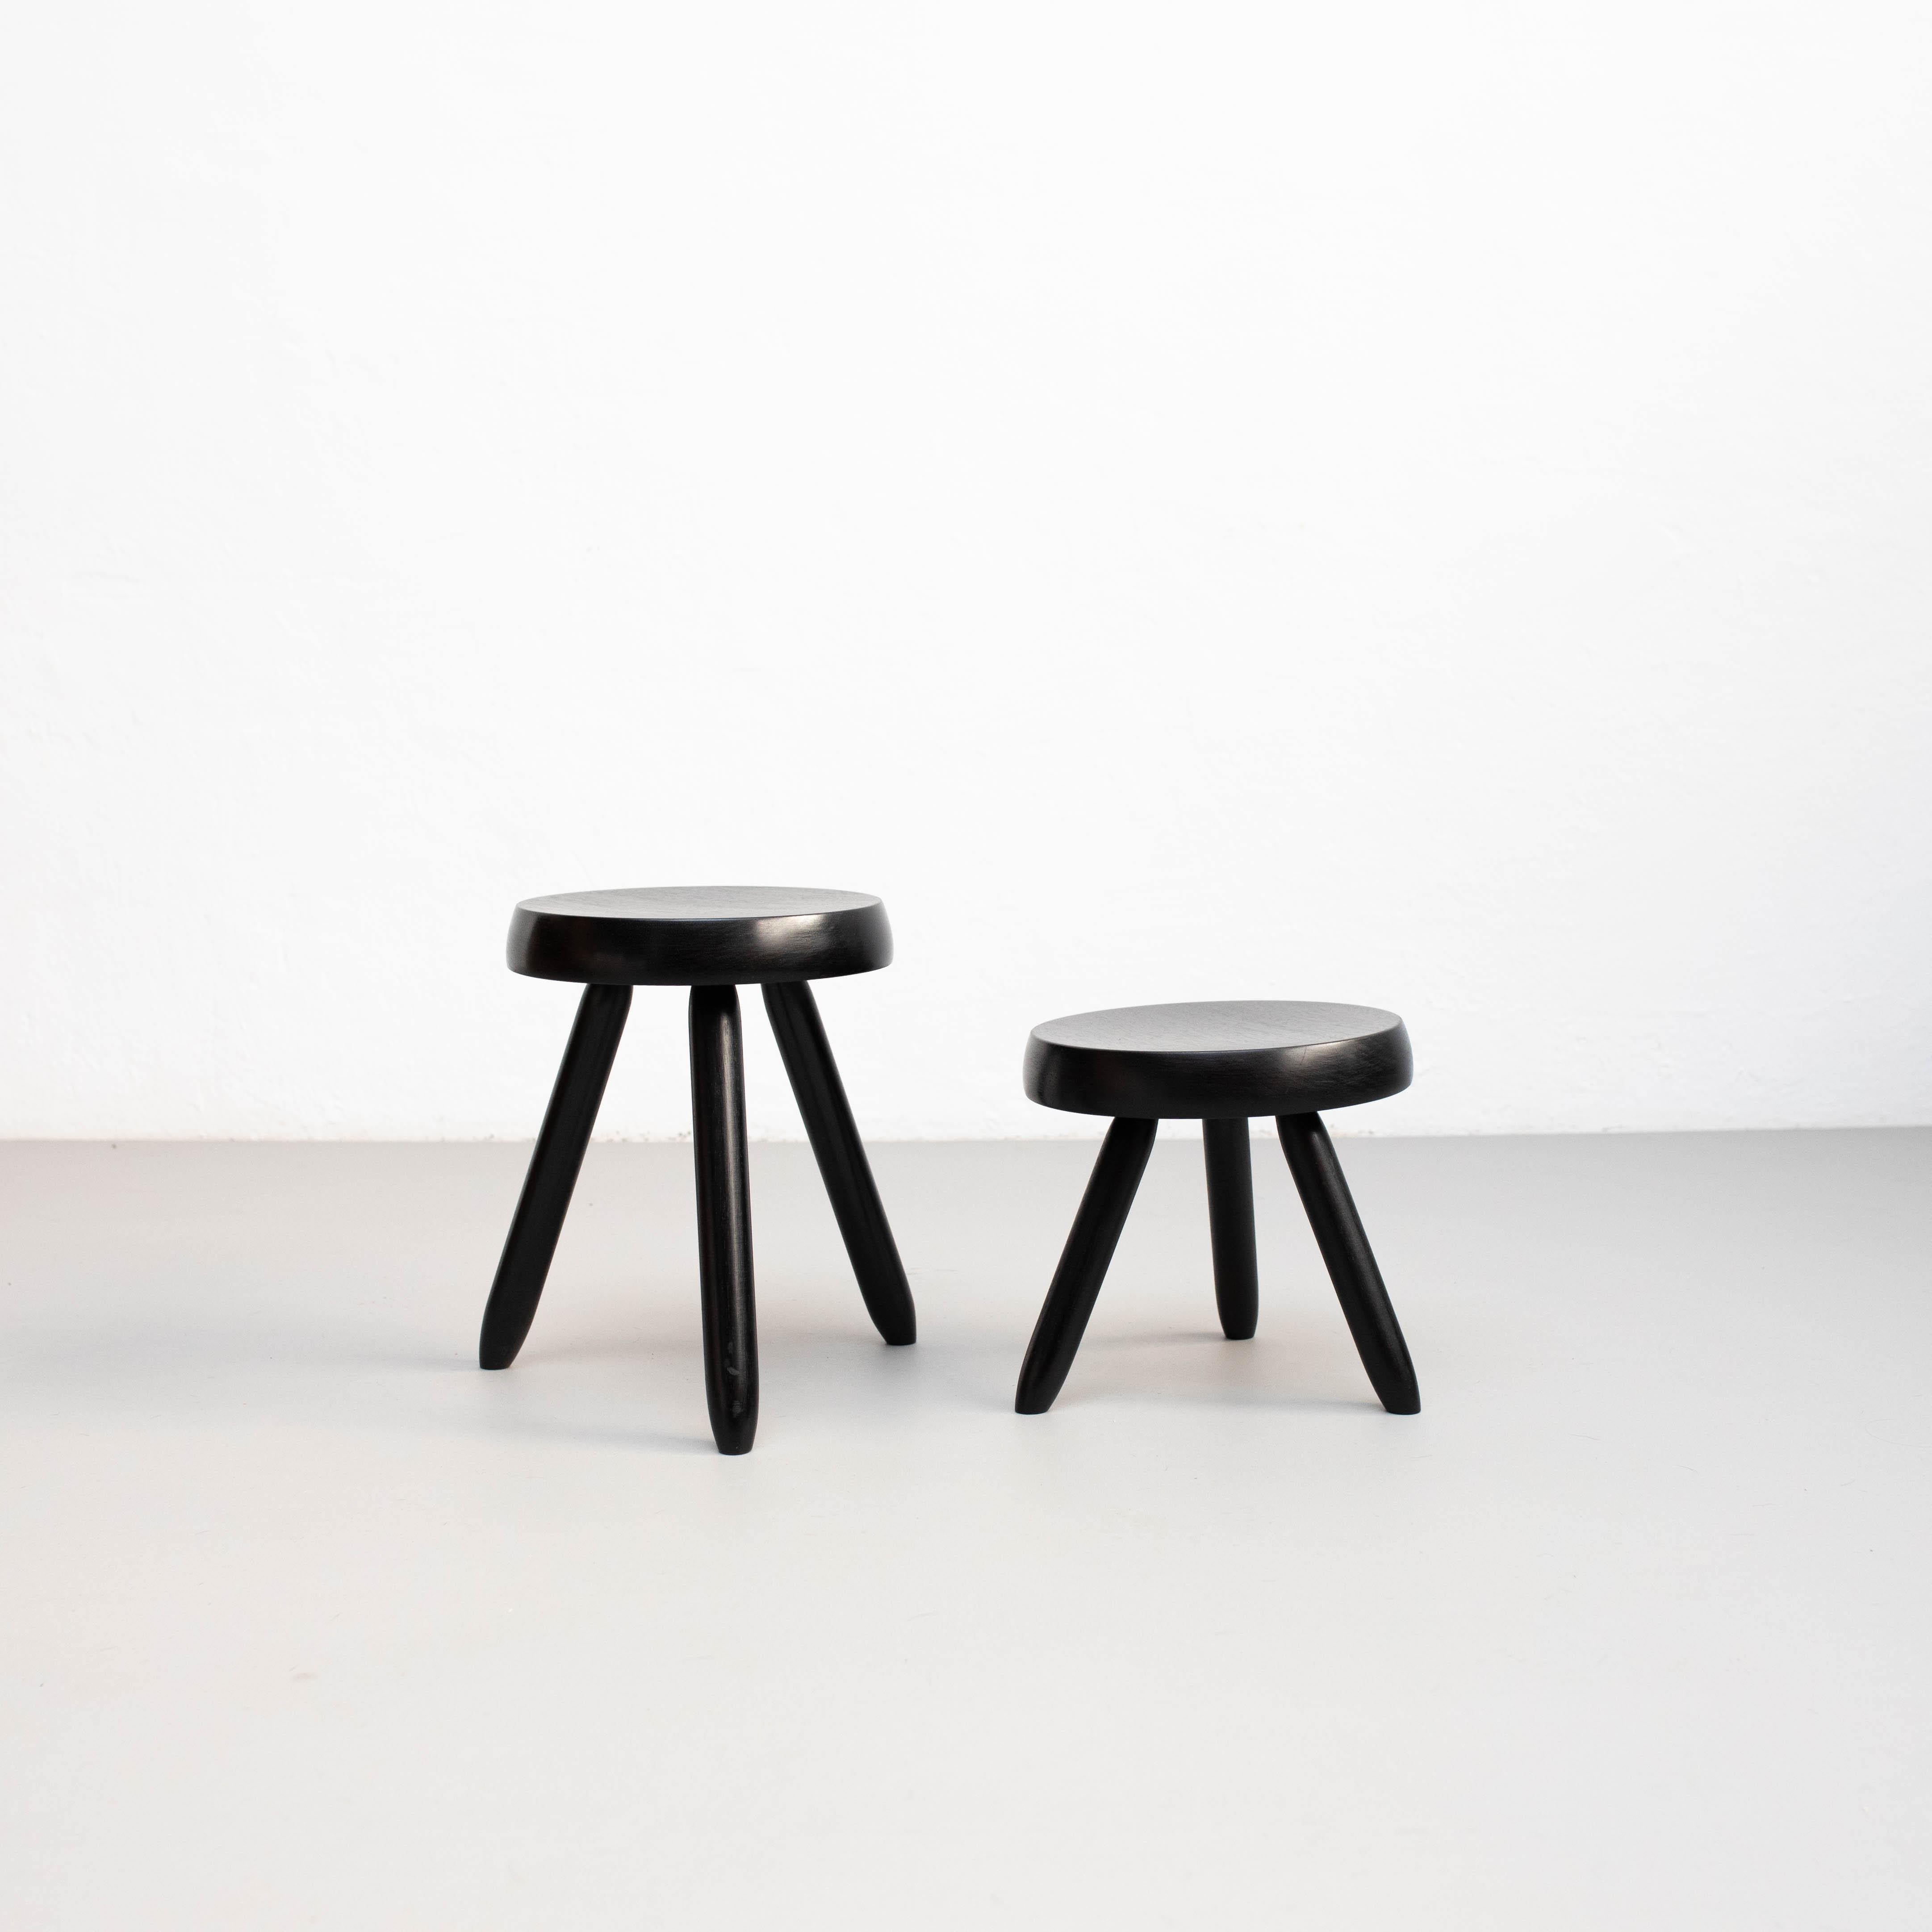 Stools designed in the style of Charlotte Perriand.
Made by unknown manufacturer.

In good original condition, preserving a beautiful patina, with minor wear consistent with age and use. 

Materials:
Wood

Dimensions:
1- 2-
H 15.5 cm H 12